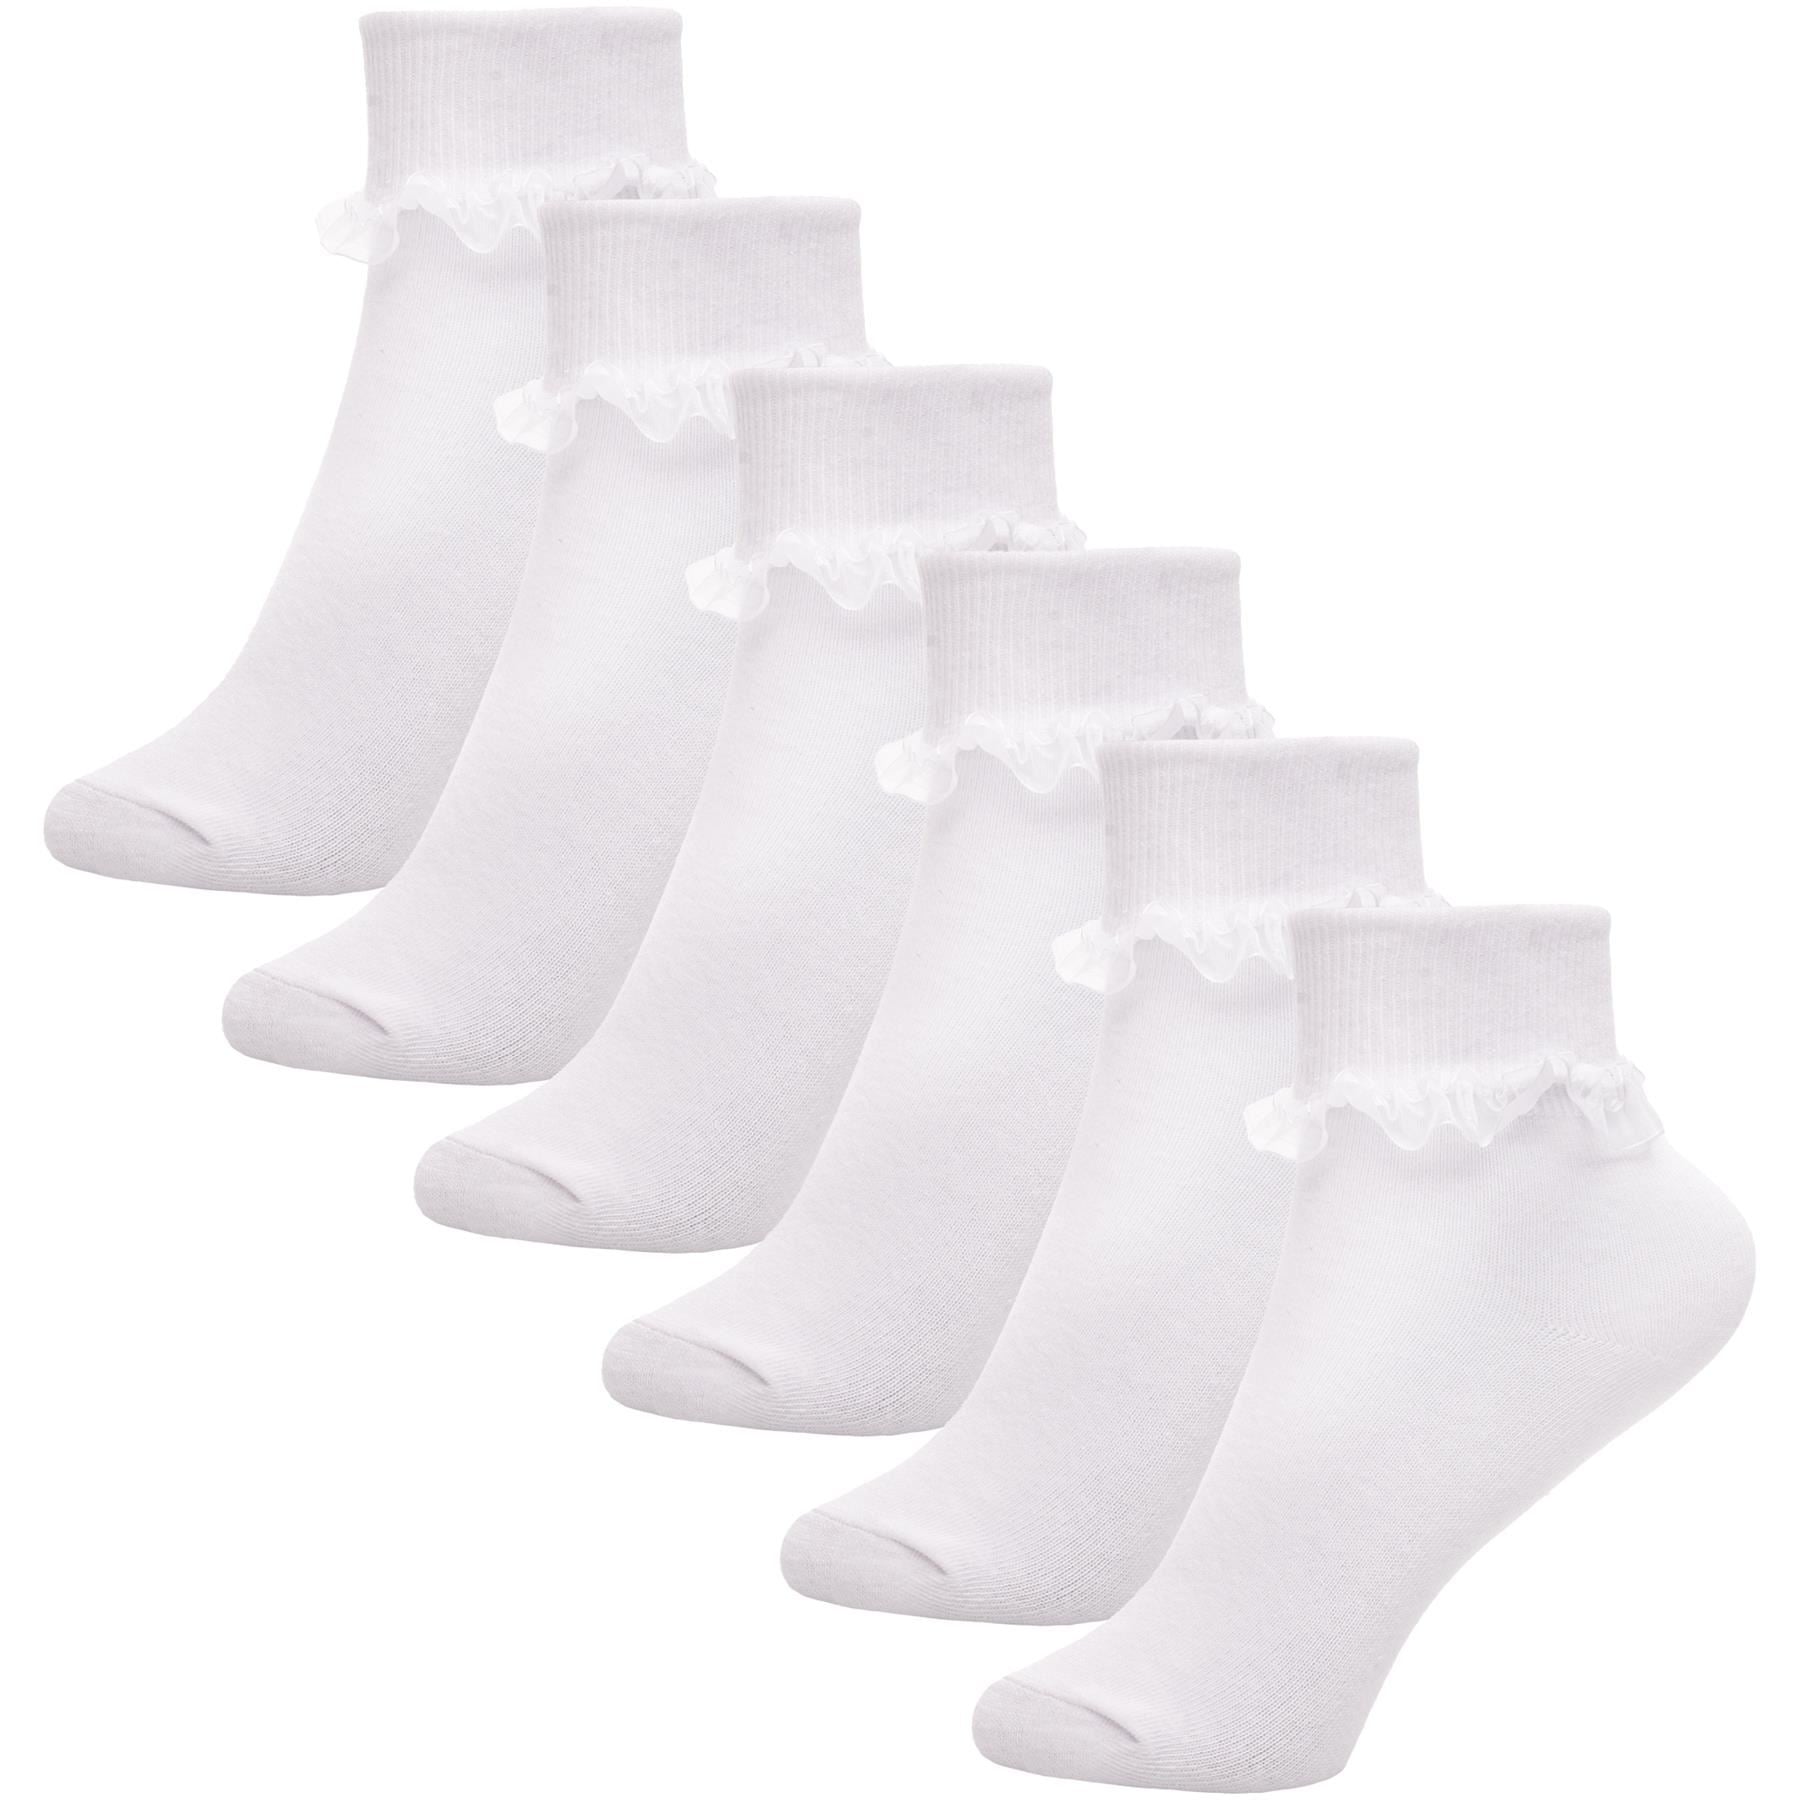 Kids Girls Frilly Lace Ankle Socks Pack of 6 White Cotton Lace Trim Socks